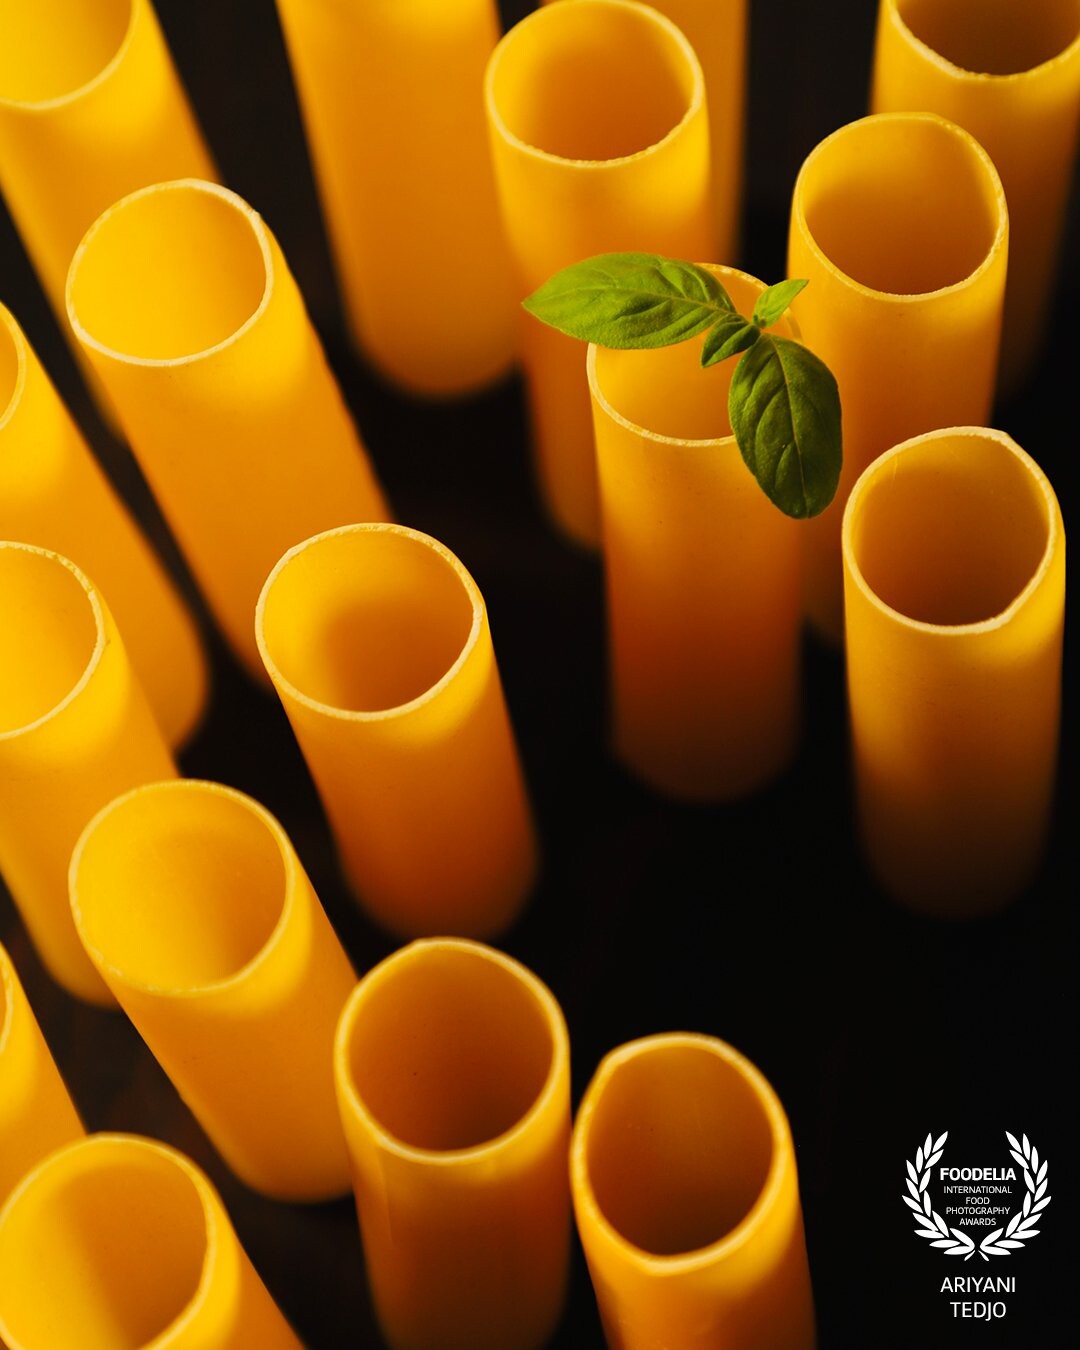 An artwork of cannelloni tubes, an arrangement inspired by a city scene of skyscrapers. The scene is accented with a sprig of fresh basil.